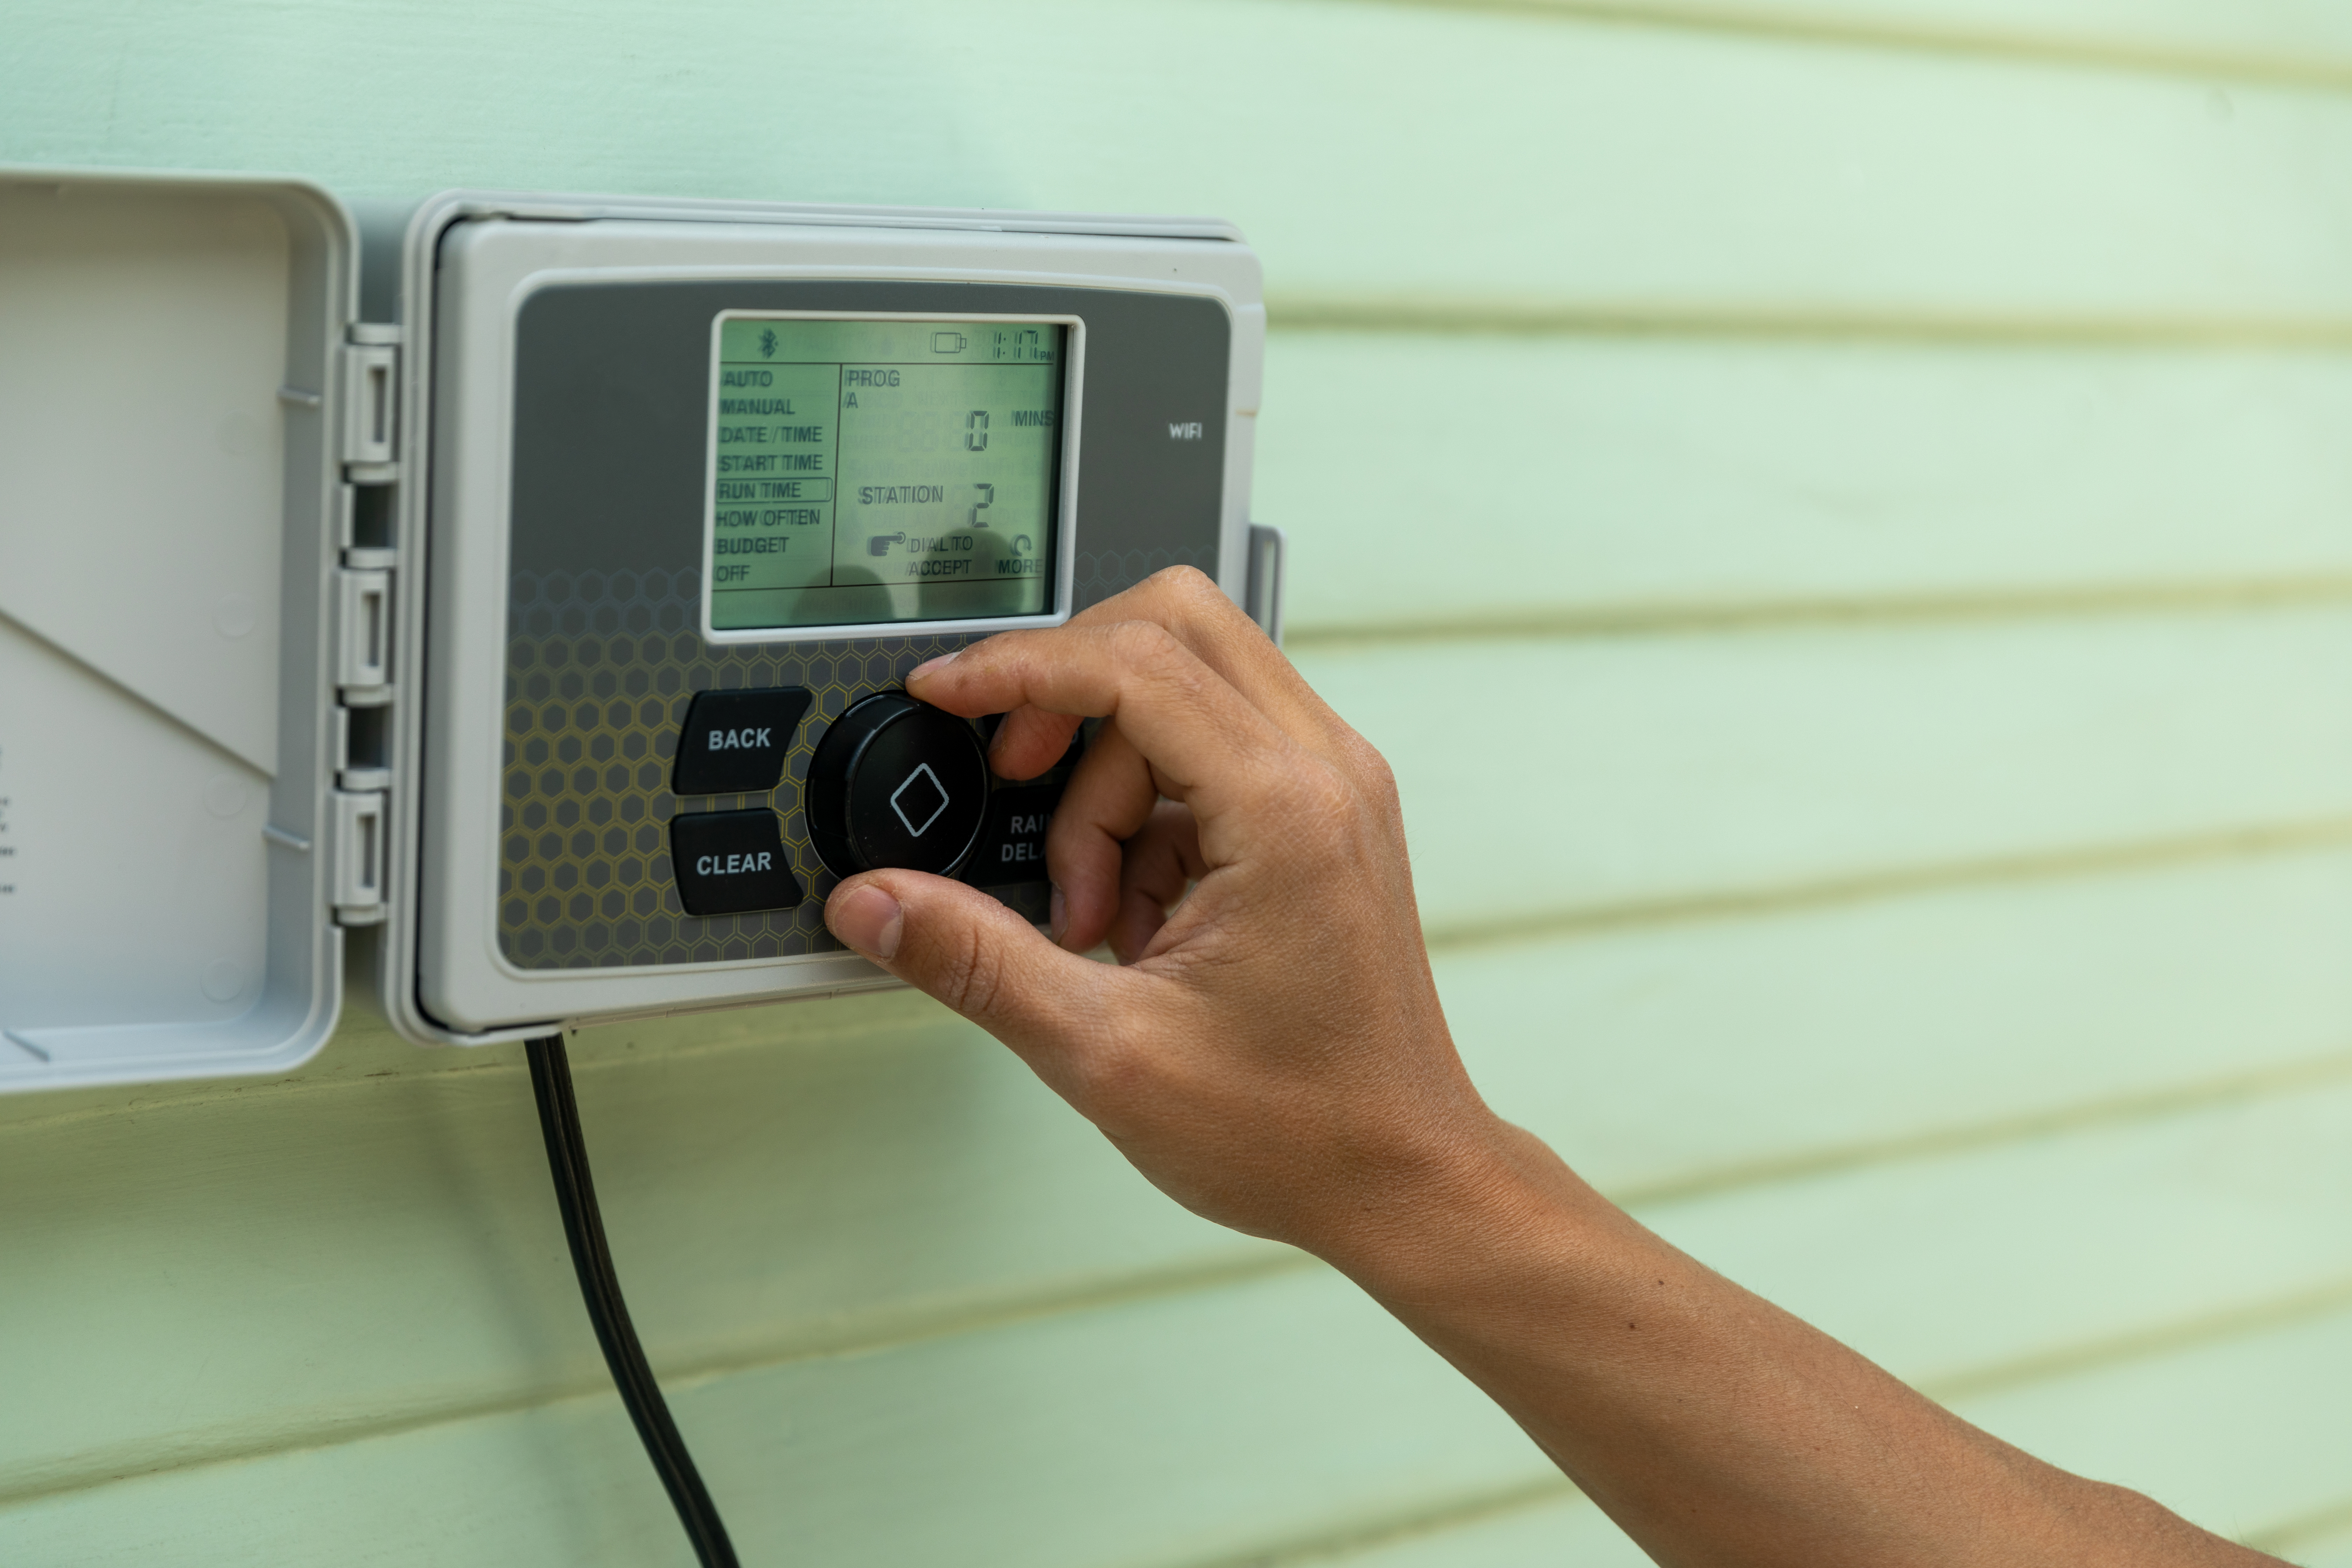 A person adjusts a smart sprinkler controller provided as a part of a water conservation program.